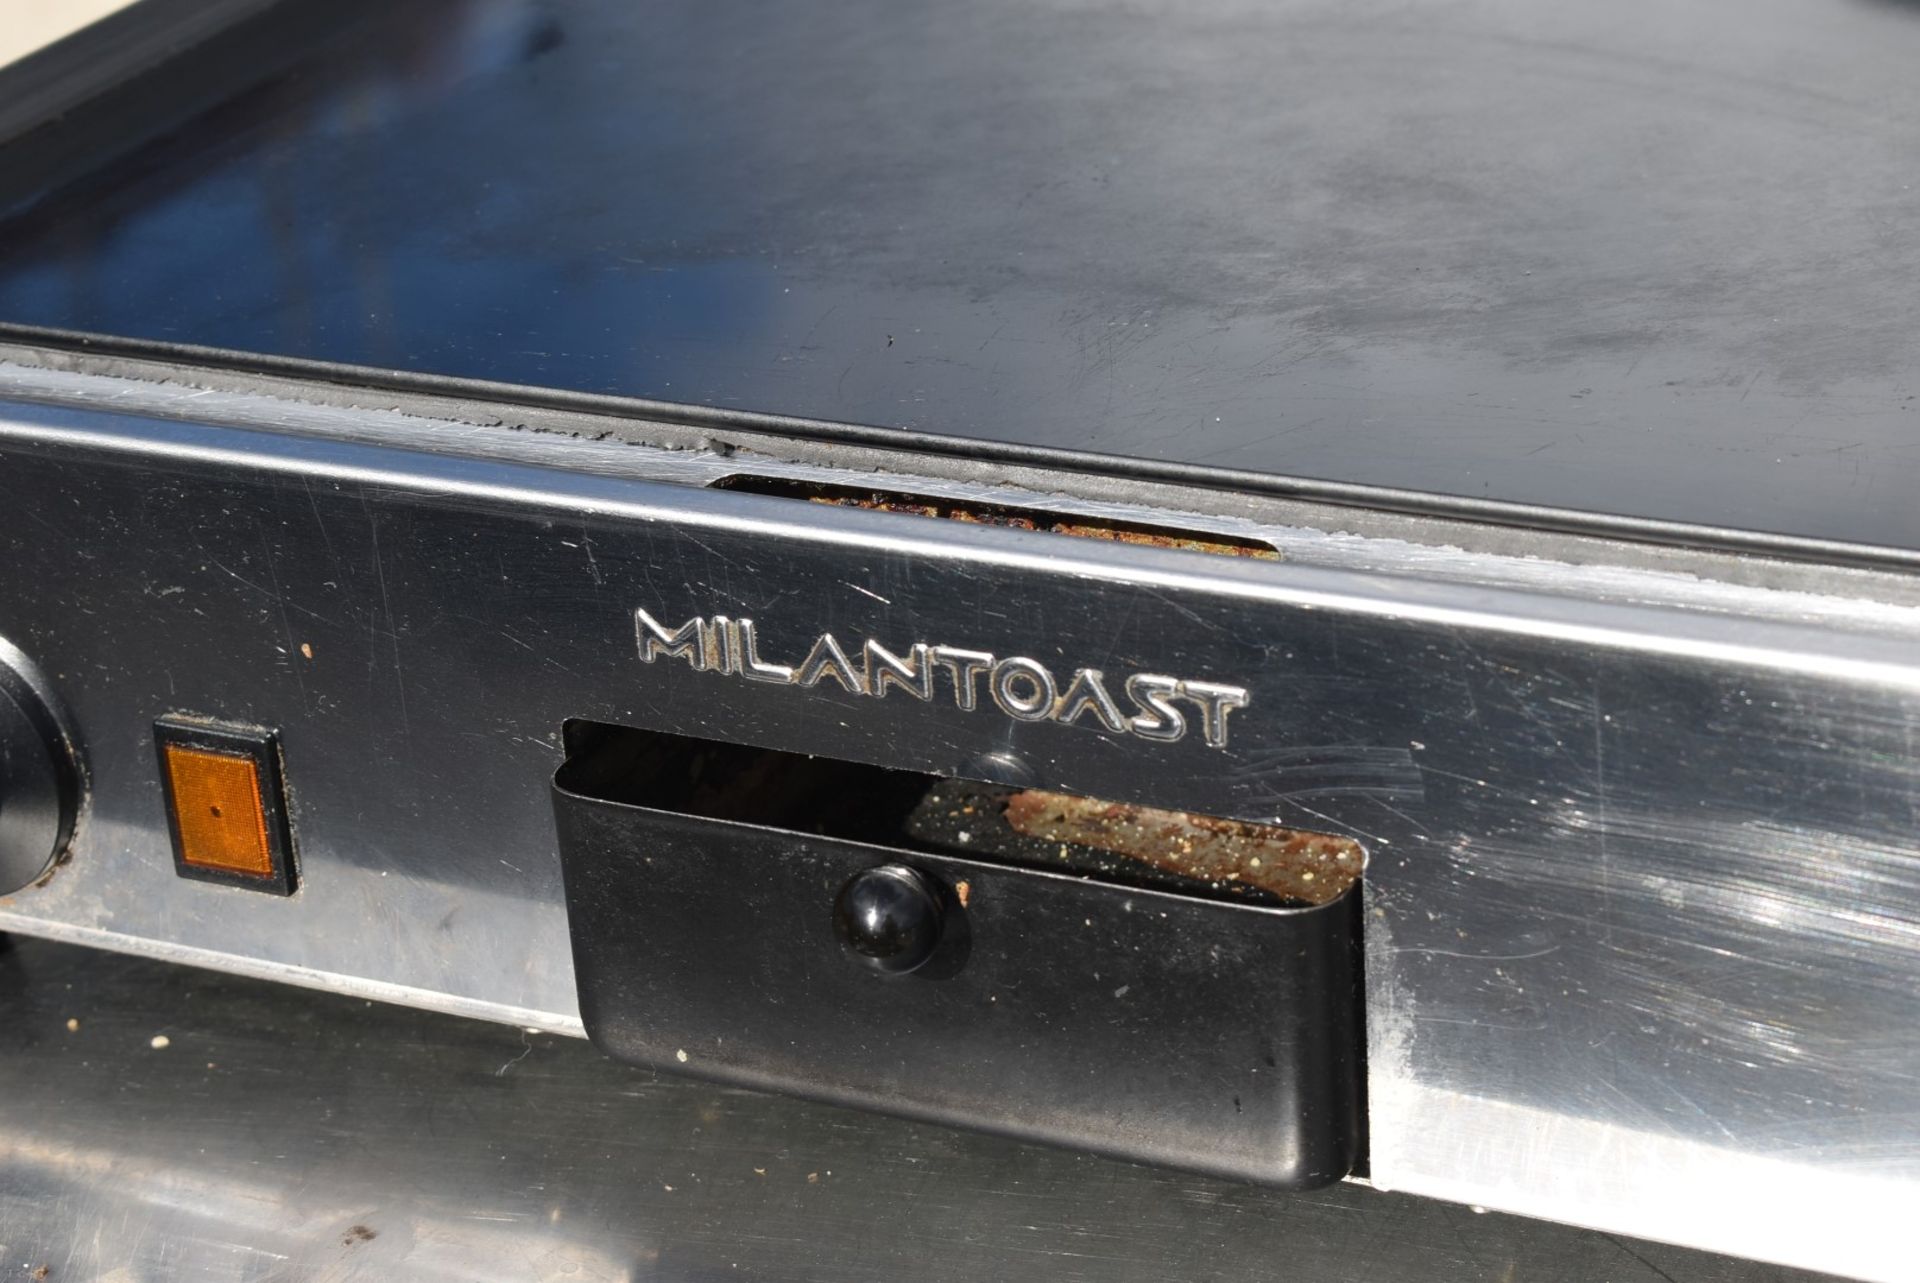 1 x Maestrowave Milantoast Countertop Ceramic Hotplate - 240v - Recently Removed From a Dark Kitchen - Image 6 of 11